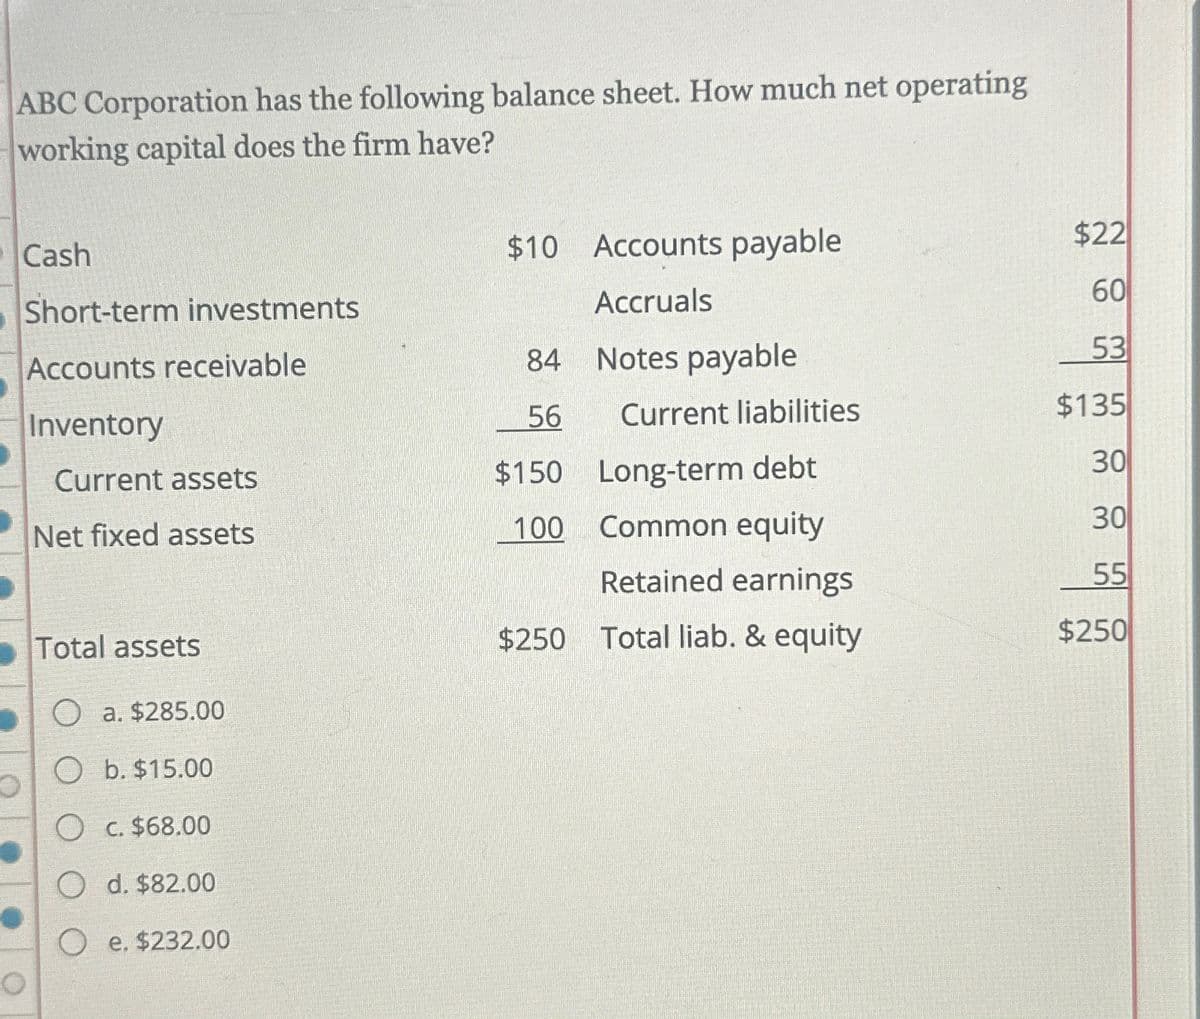 ABC Corporation has the following balance sheet. How much net operating
working capital does the firm have?
Cash
Short-term investments
Accounts receivable
Inventory
Current assets
Net fixed assets
Total assets
O a. $285.00
O b. $15.00
O c. $68.00
O d. $82.00
Oe. $232.00
$10 Accounts payable
Accruals
84 Notes payable
56
Current liabilities
$150 Long-term debt
100
Common equity
Retained earnings
Total liab. & equity
$250
$22
60
53
$135
30
30
55
$250